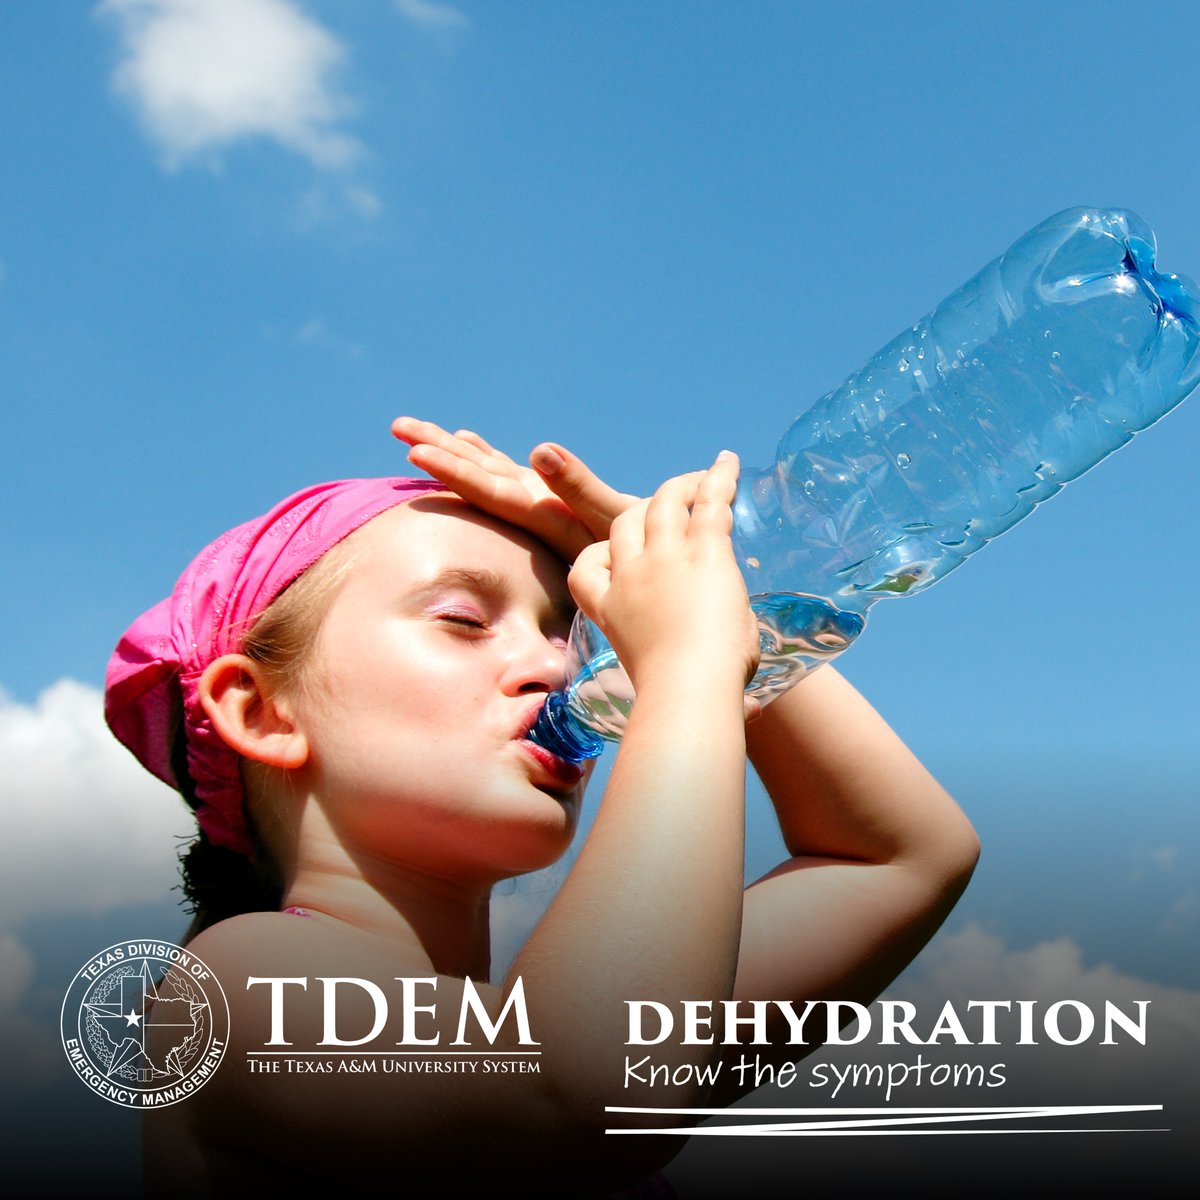 ☀️As TX warms up this week, be sure to know the signs of heat-related illness:

🌡️High body temperature
🥵Profusely sweating
💤Fatigue & dizziness

💧Drink water to stay hydrated!

More Heat Safety Tips: ready.gov/heat

#BeatTheHeat